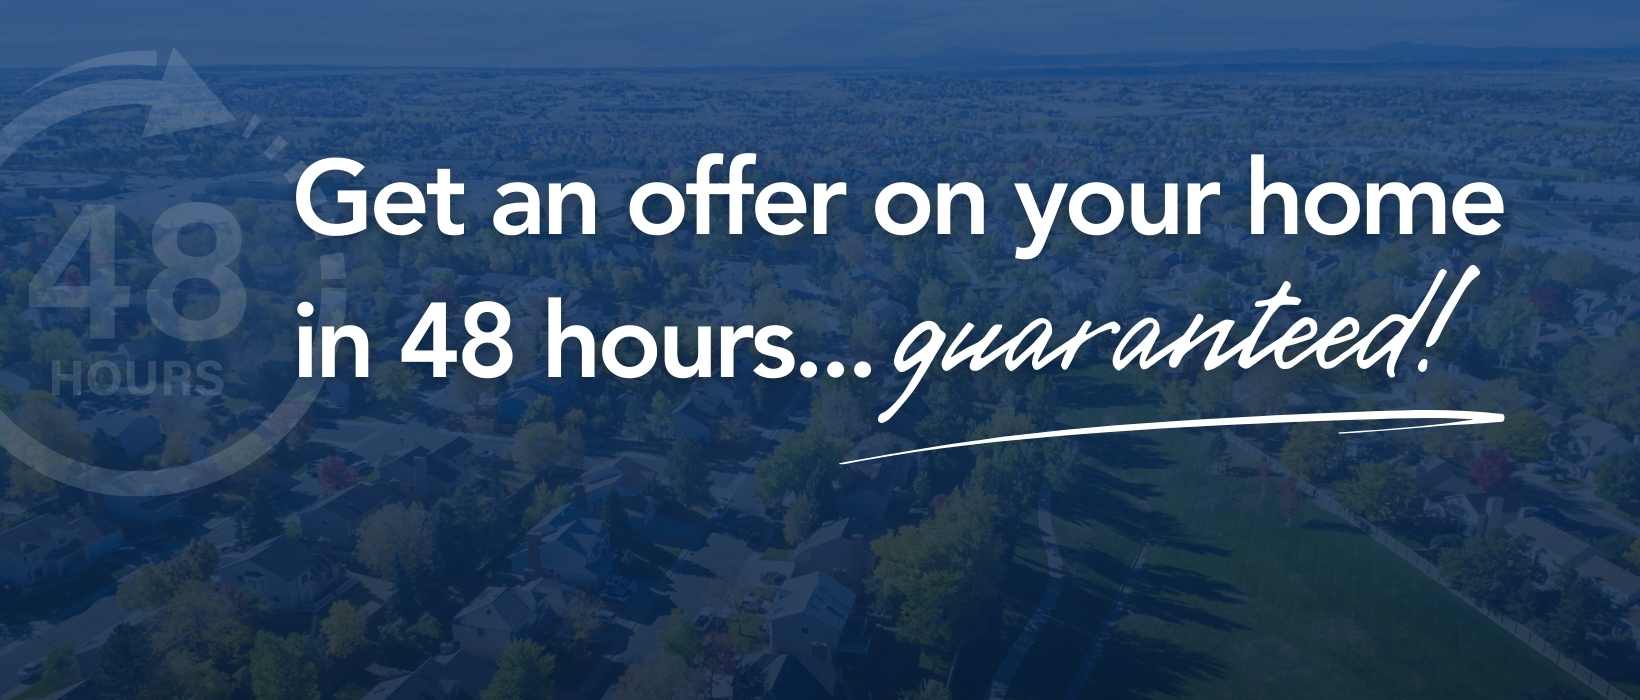 Get an offer on your home in 48 hours...guaranteed!